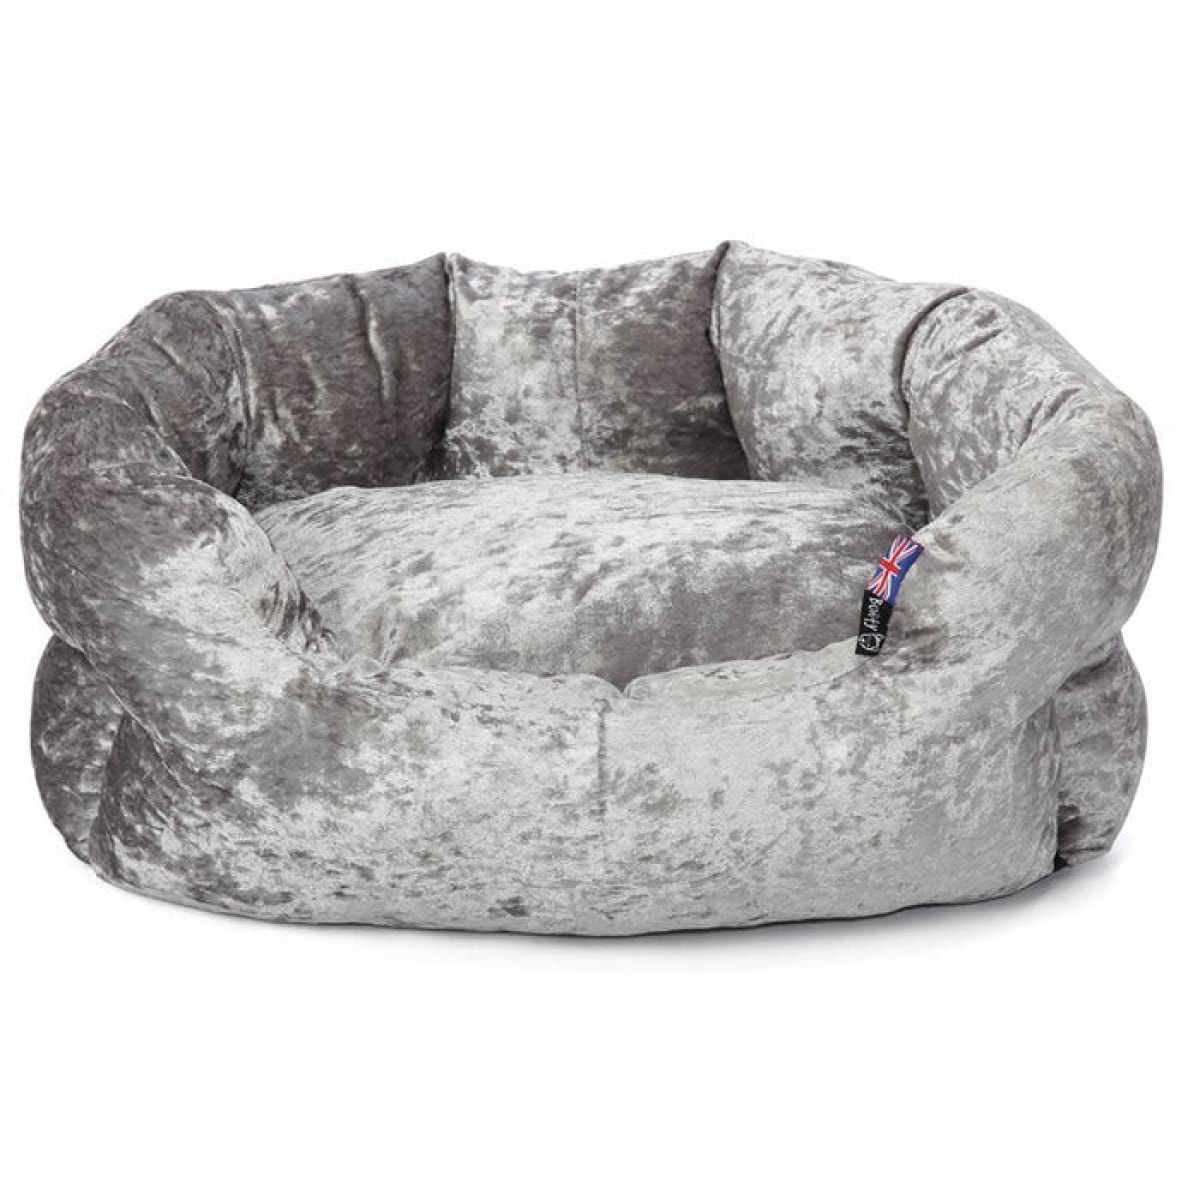 Bellagio Dog Bed - Crushed Silver Main Image